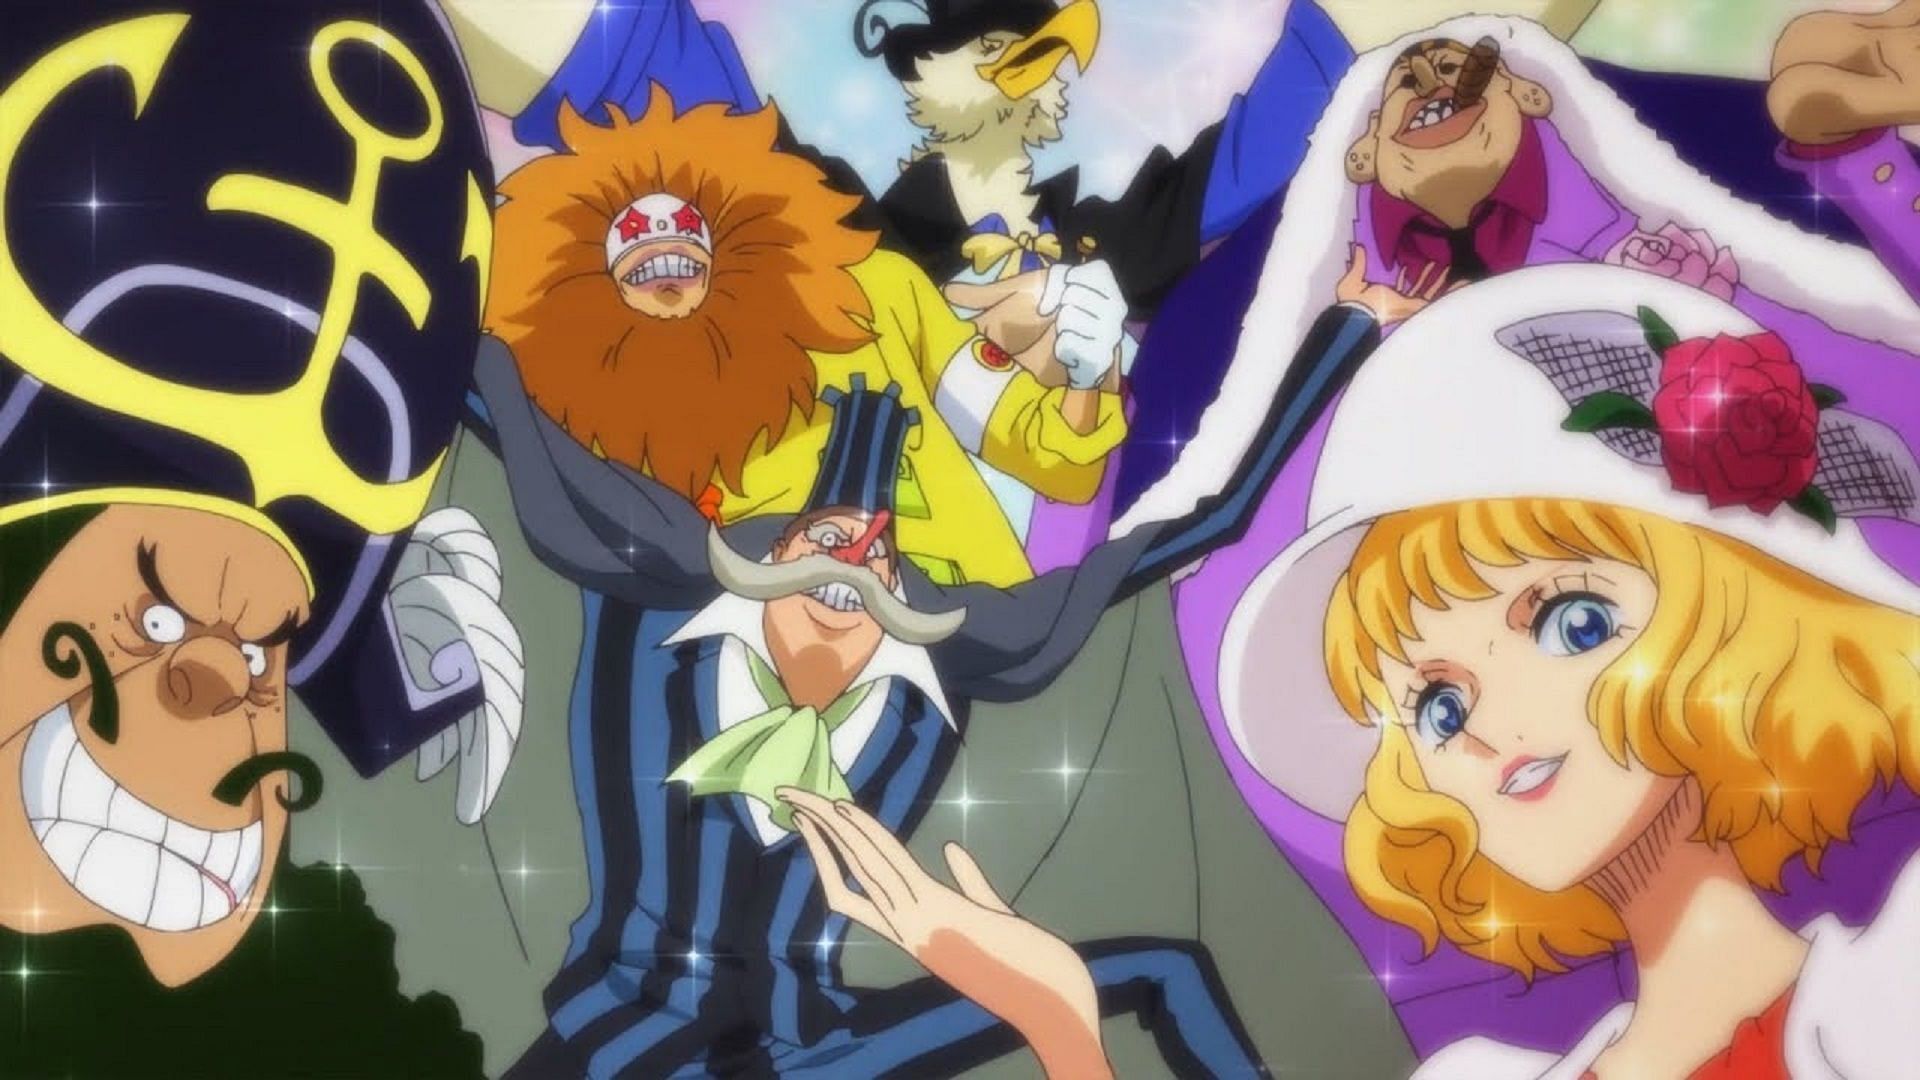 With Du Feld having been revealed as the financier of MADS, the tie between him and Stussy becomes interesting (Image via Toei Animation/One Piece)